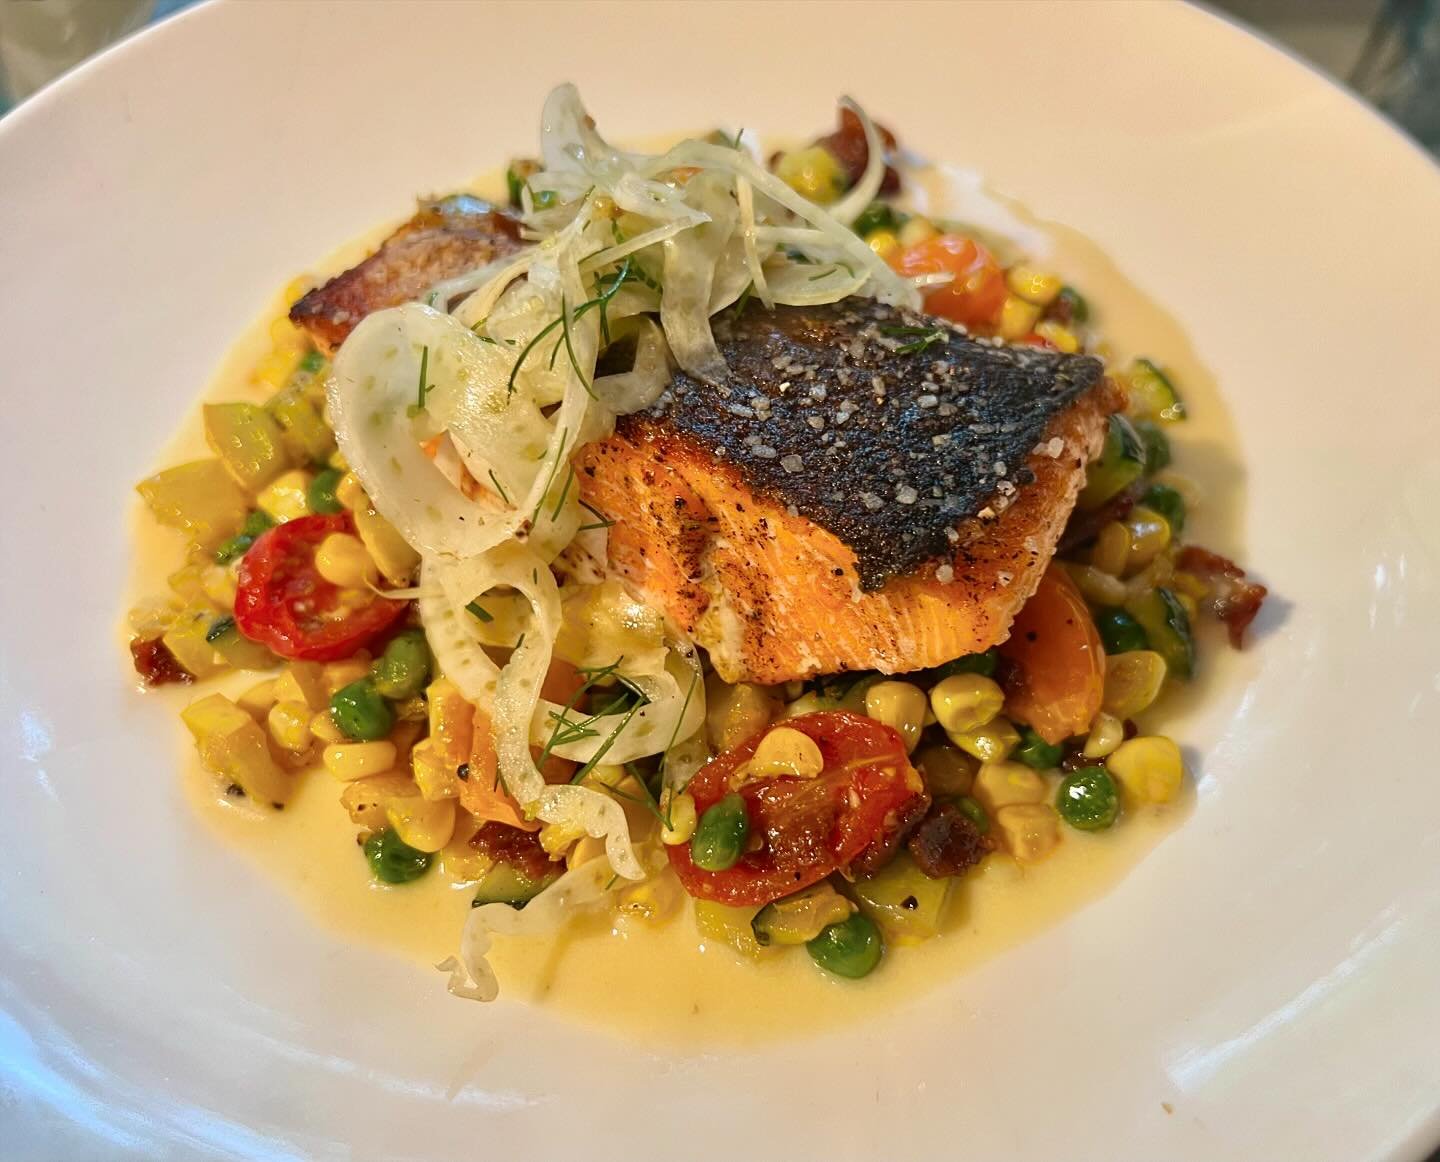 LODGE STYLE ‼️ Loving this New Zealand King Salmon with perfectly crisp skin. Pop over and enjoy #orasalmon #succotash